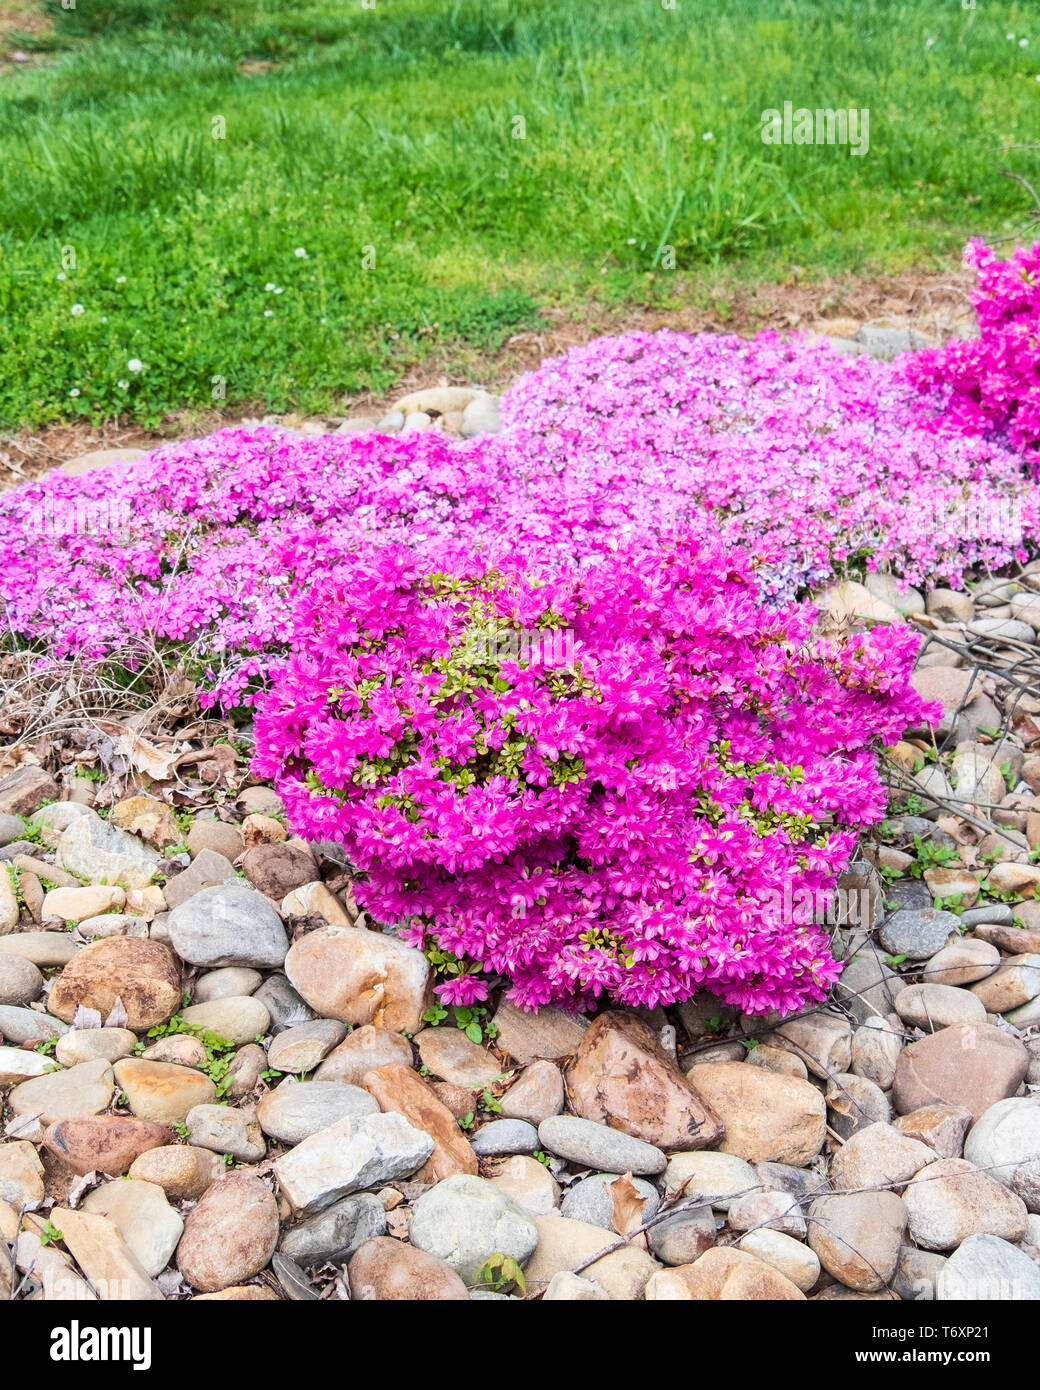 Pink creeping phlox, Phlox subulata, and pink Azalias, genus Rhododendron, Pentanthera, blooming in a spring planting in Knoxville, Tennessee, USA. Stock Photo